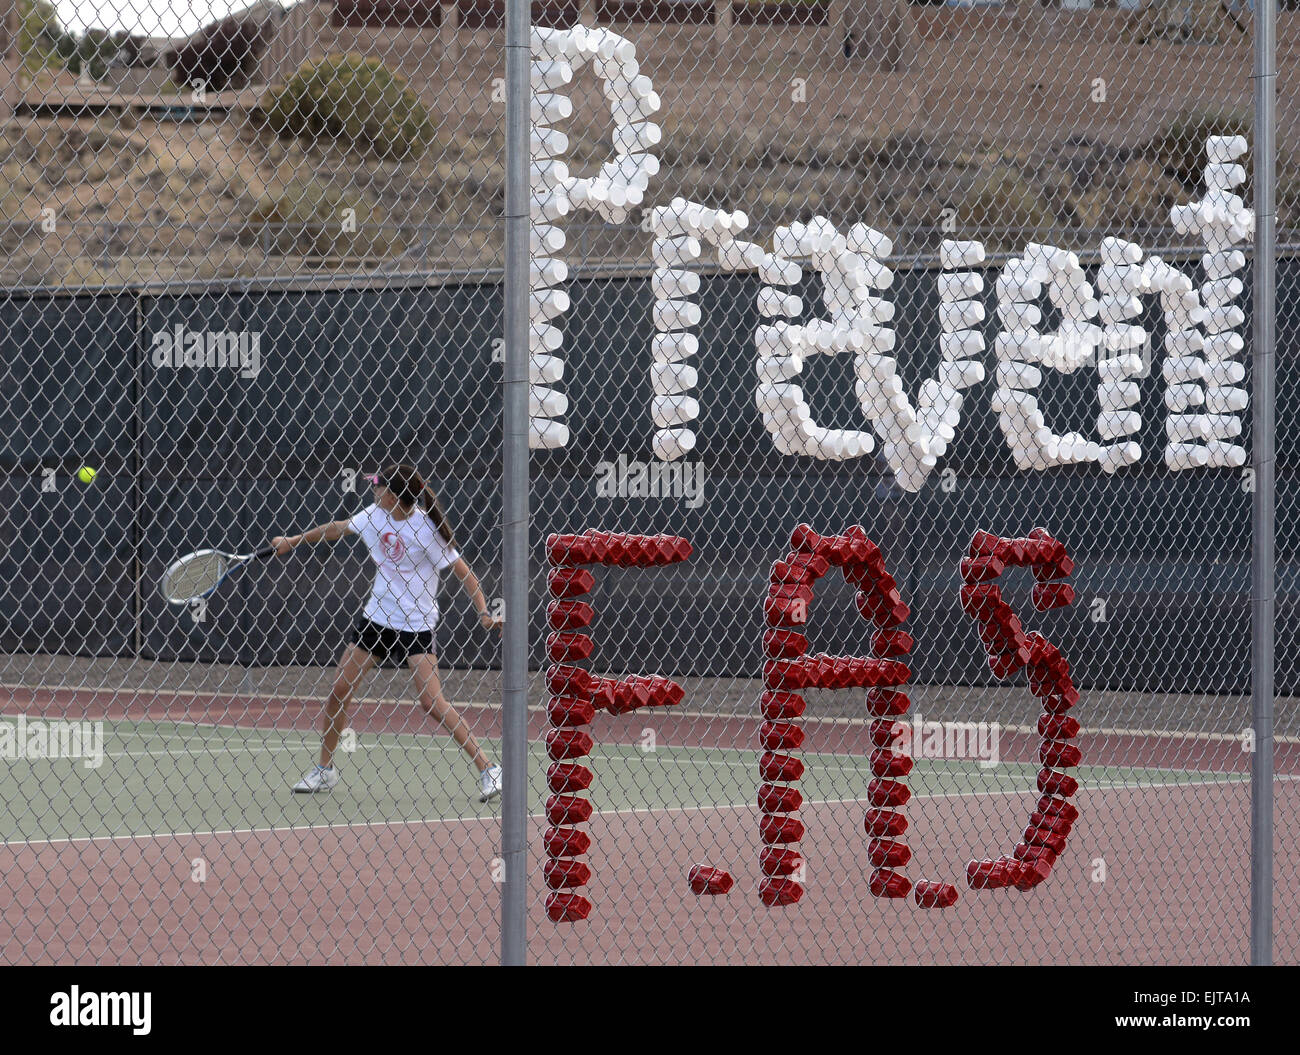 Usa. 31st Mar, 2015. Sports -- The Cibola girls tennis match against Cleveland was used to promote awareness for Fetal Alcohol Syndrome on Tuesday, March 31, 2015. Cibola's Samantha Lambrecht returns serve behind the cups spelling out the FAS message. © Greg Sorber/Albuquerque Journal/ZUMA Wire/Alamy Live News Stock Photo